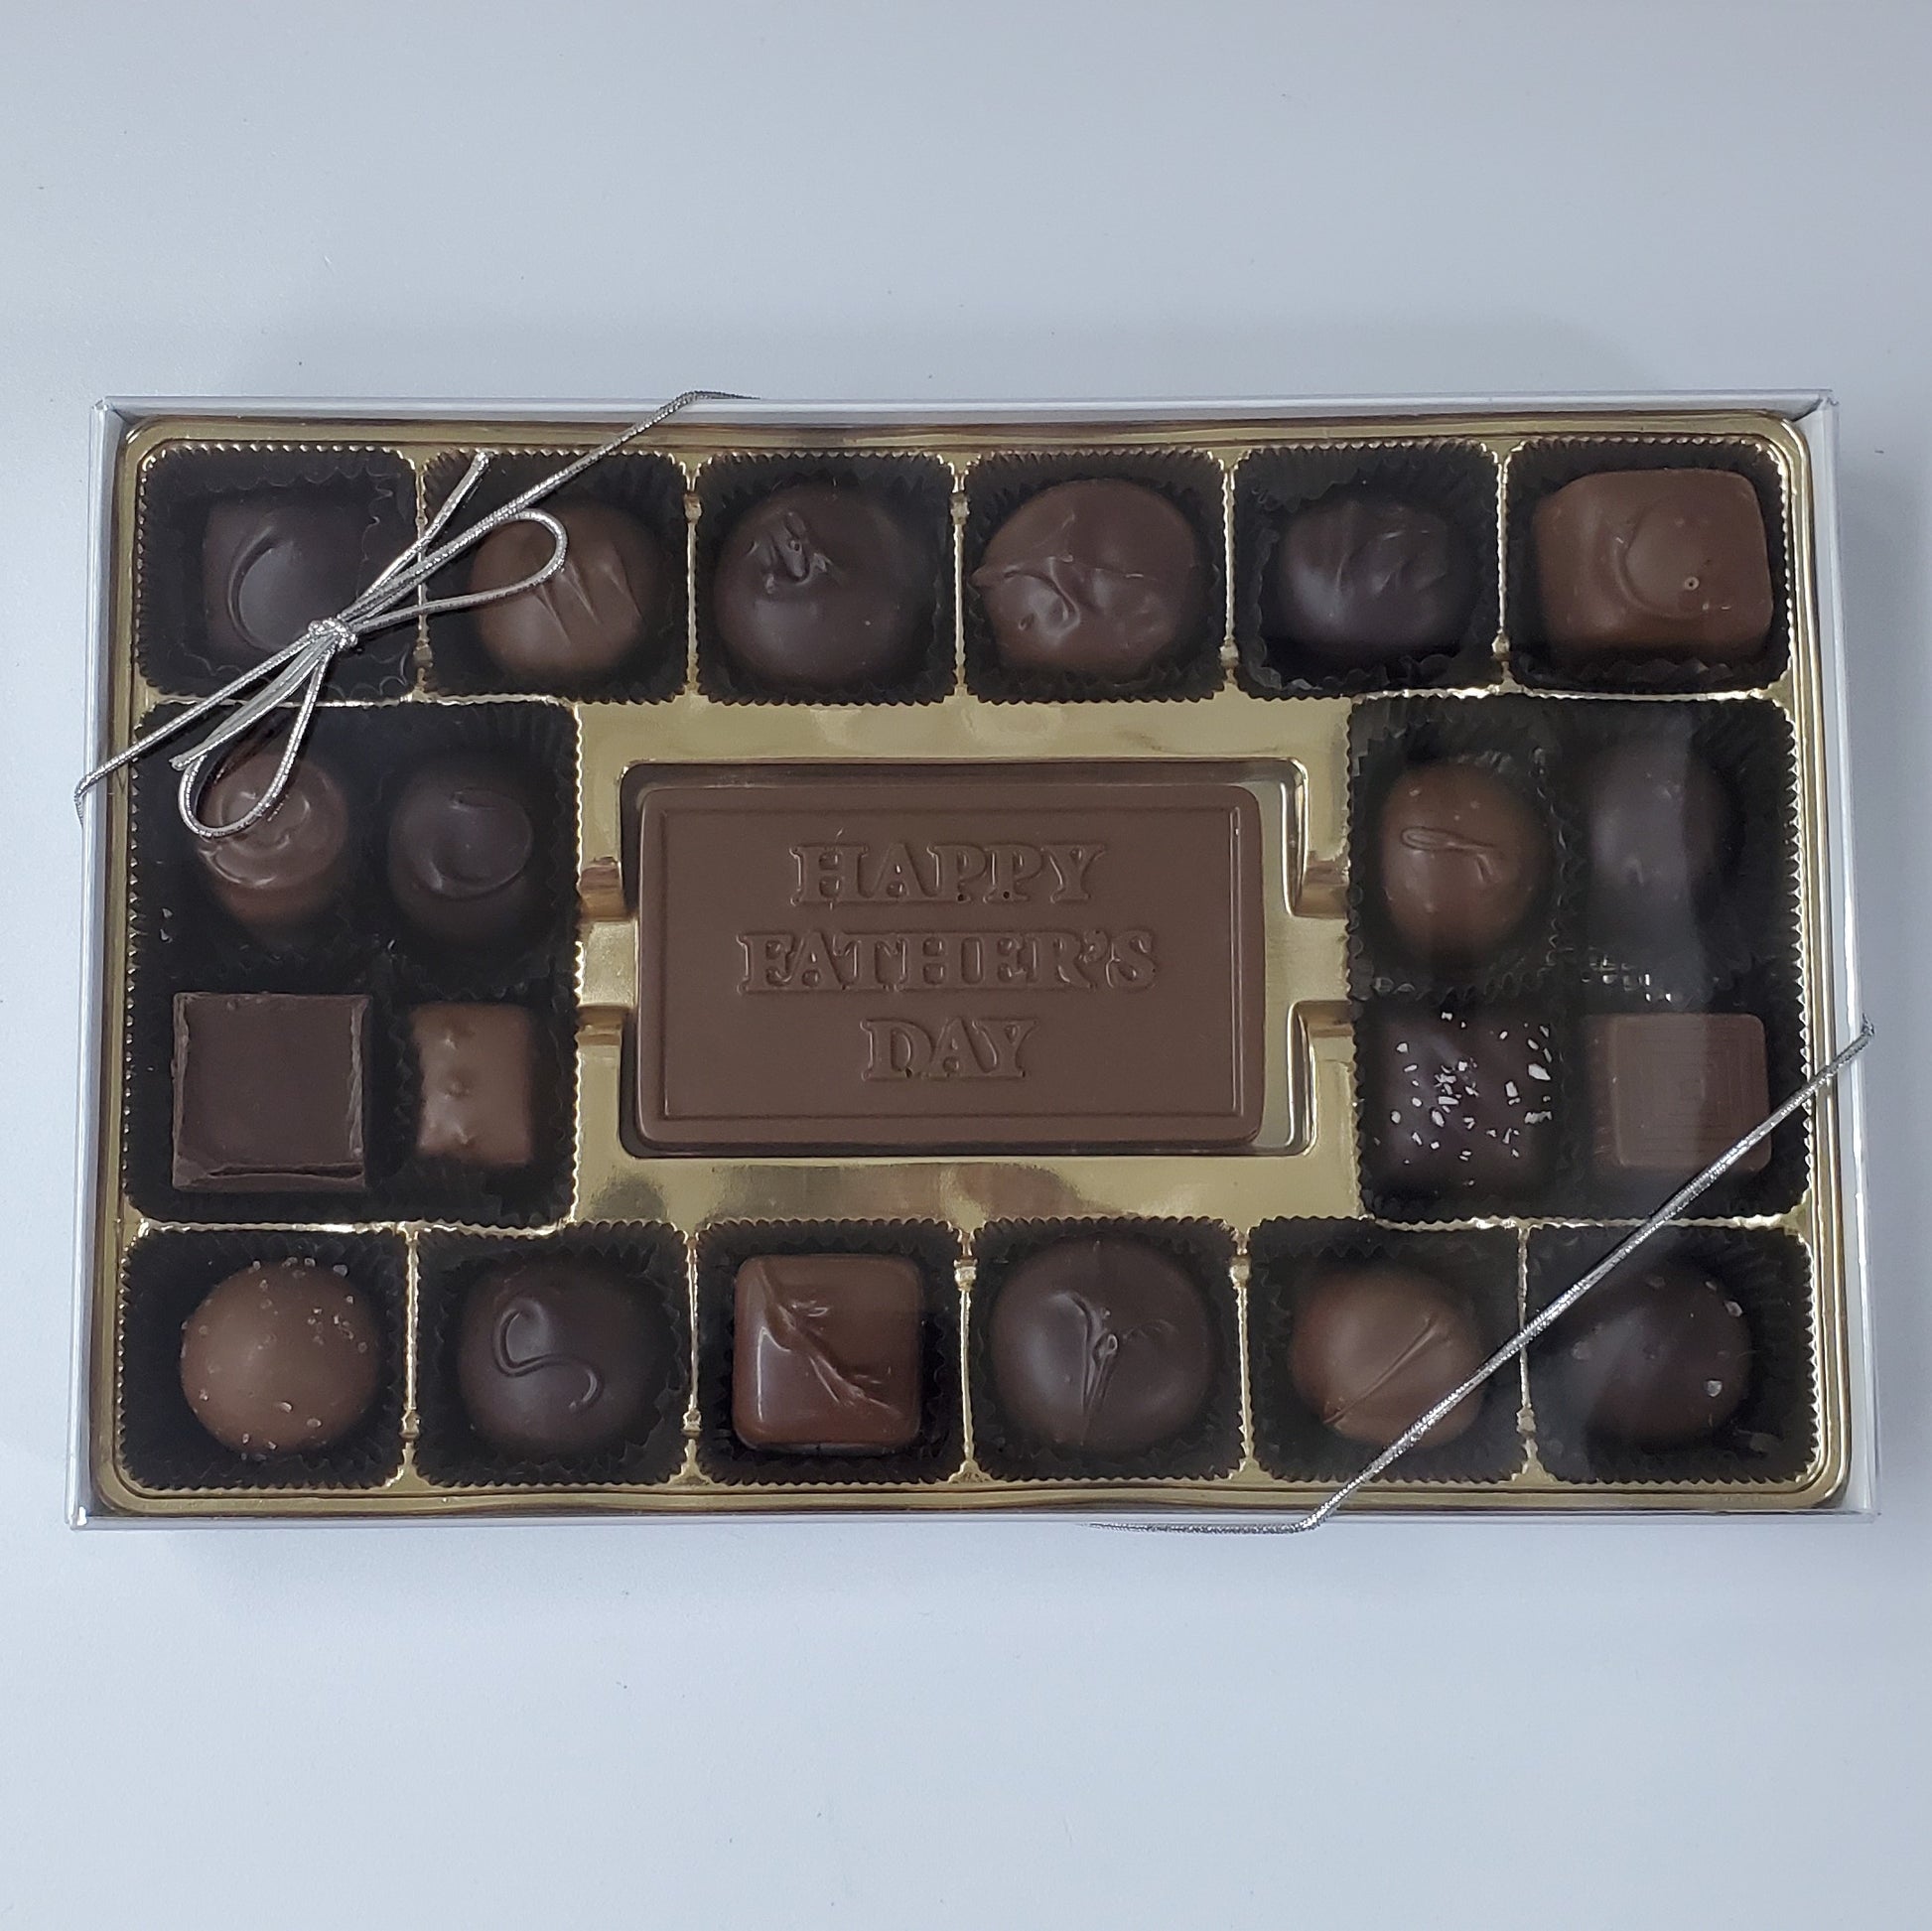 20 Assorted of our Most Popular Hand Made Chocolates in a Decorative Box  with 'Happy Father's Day' Chocolate Greeting Card